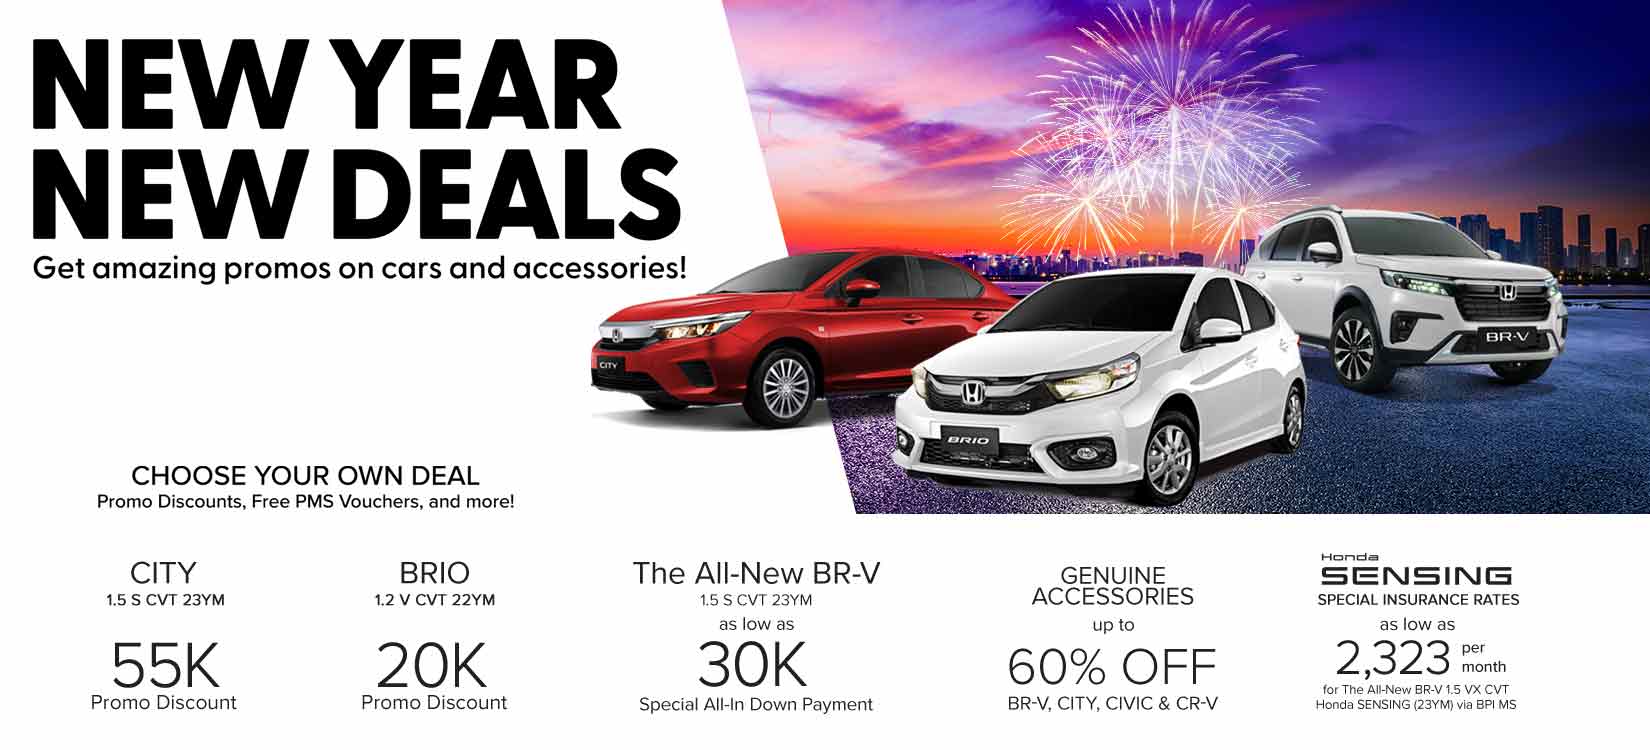 Honda Cars PH extends “New Year, New Deals” with special promo for City and Brio